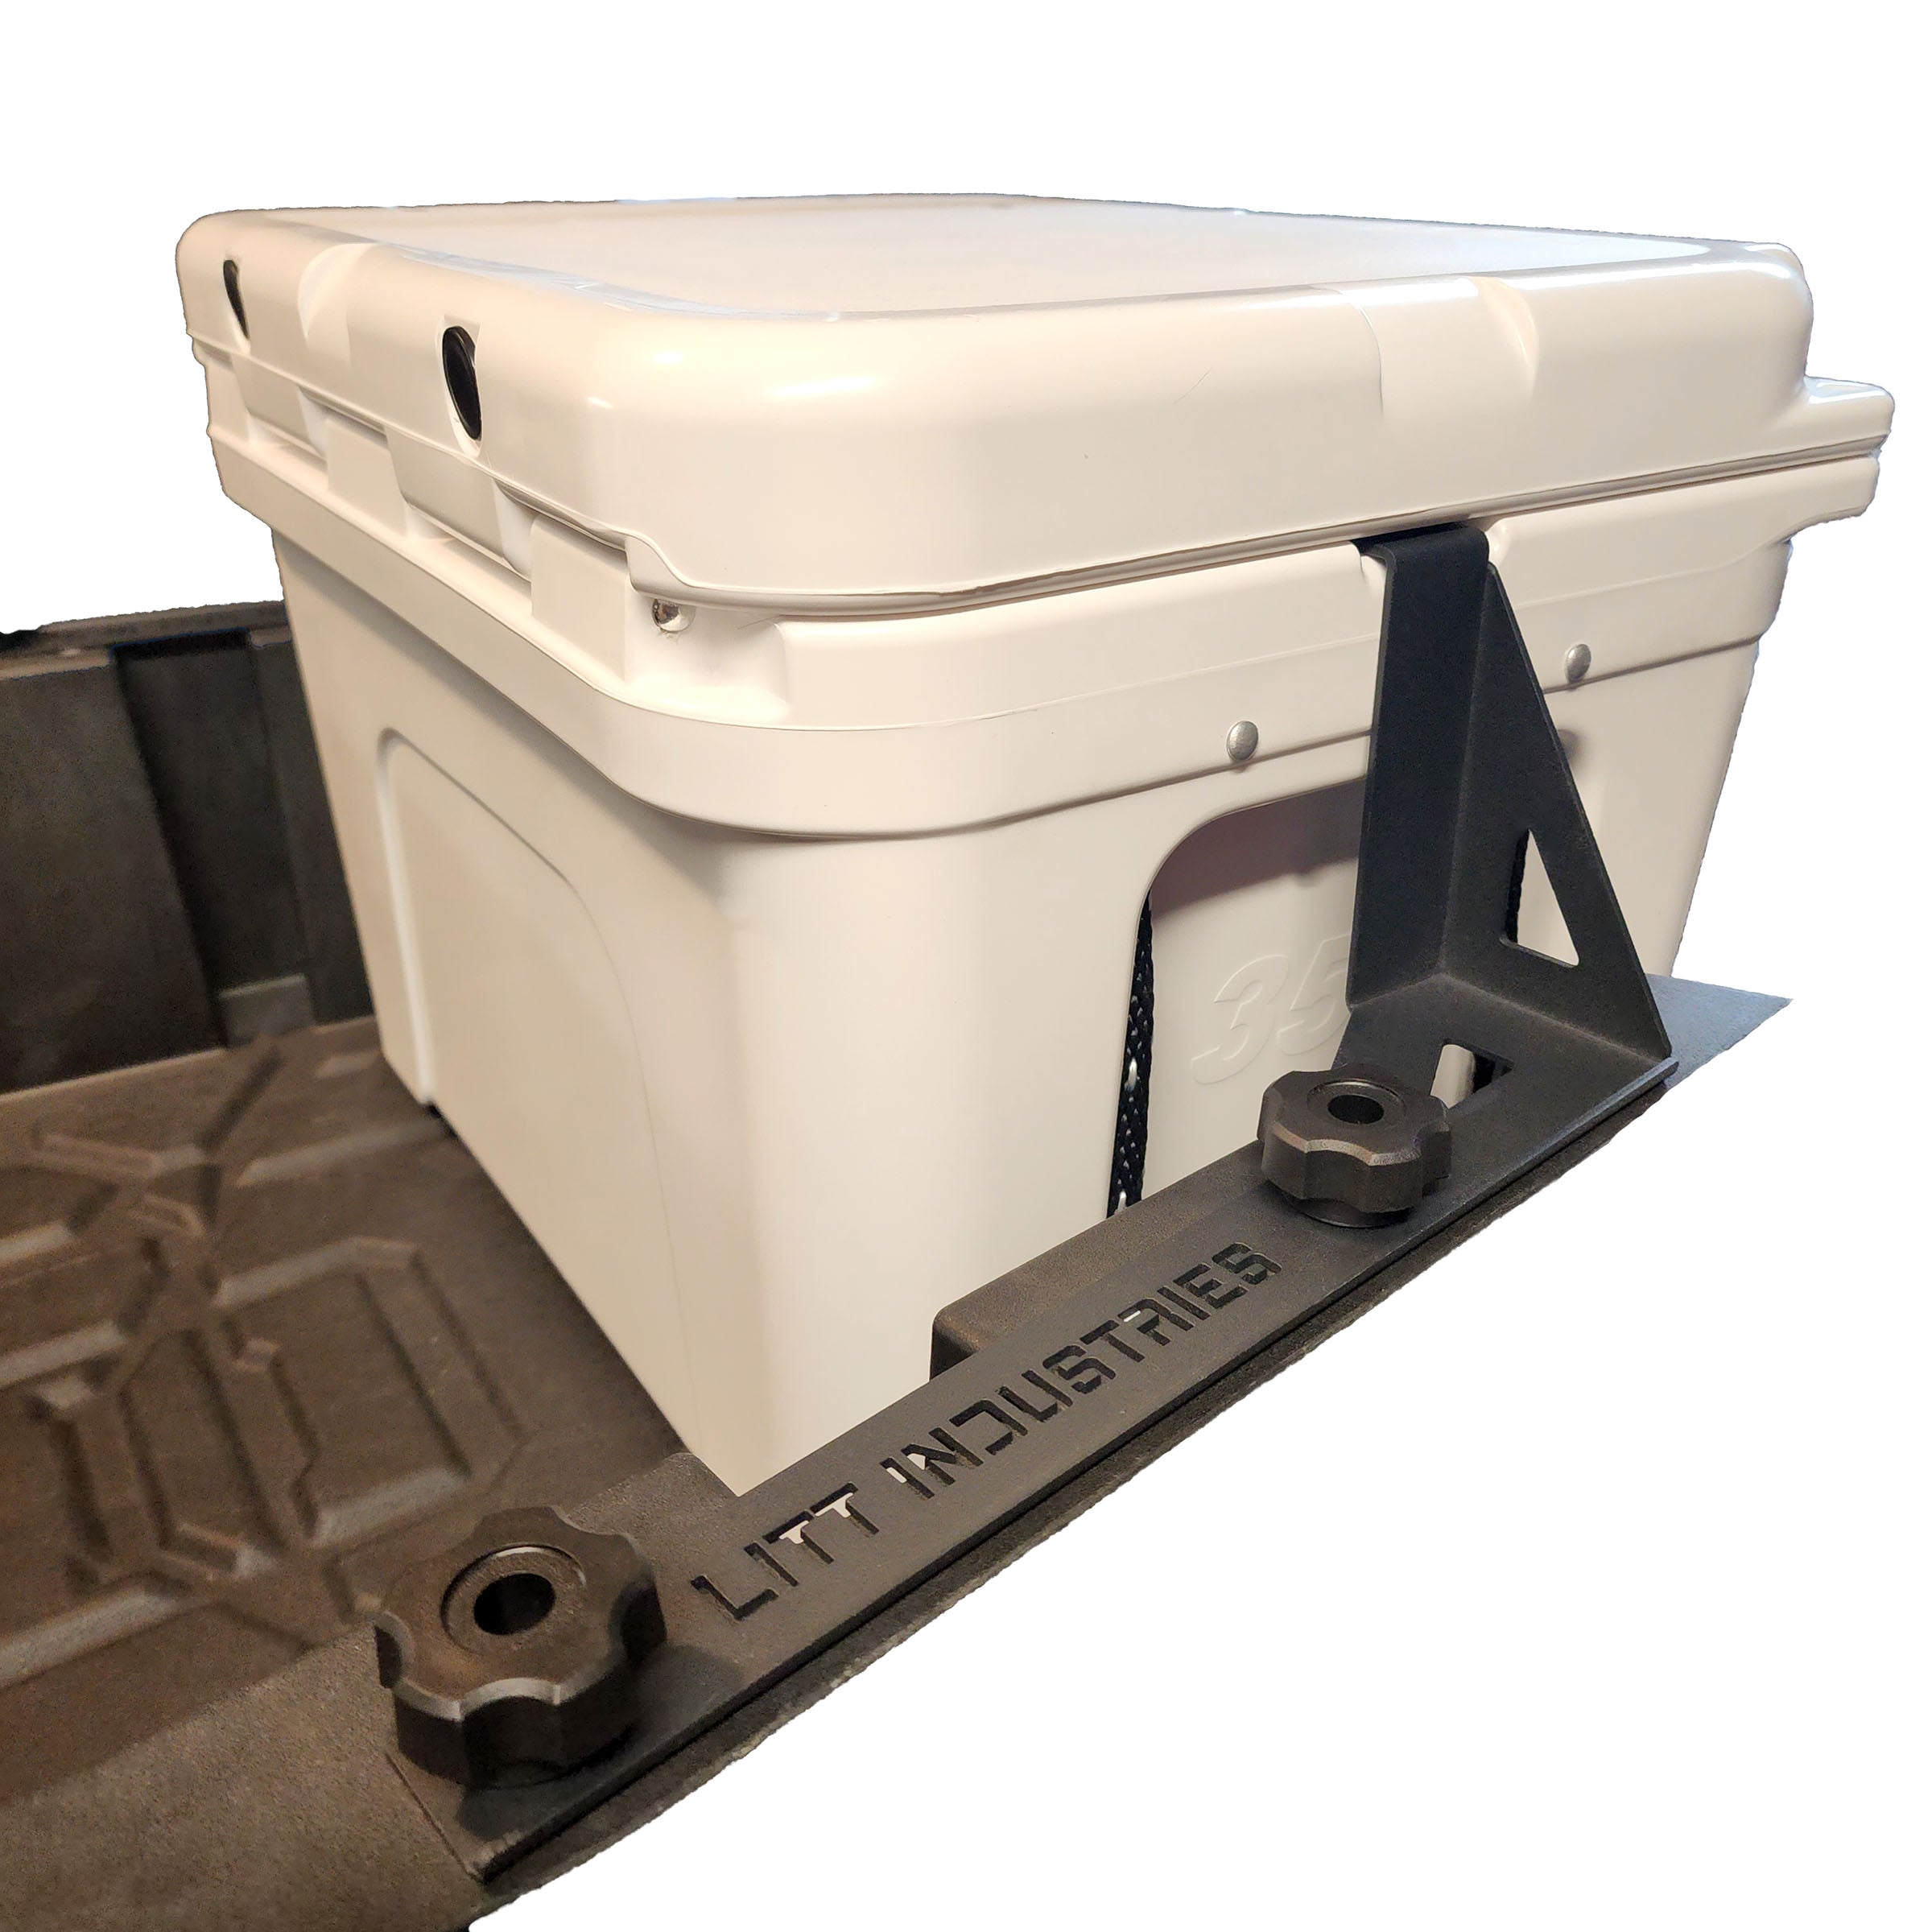 Litt Industries Yeti 35qt Cooler Mount for Polaris RZR PRO R Brackets to hold your cooler in place